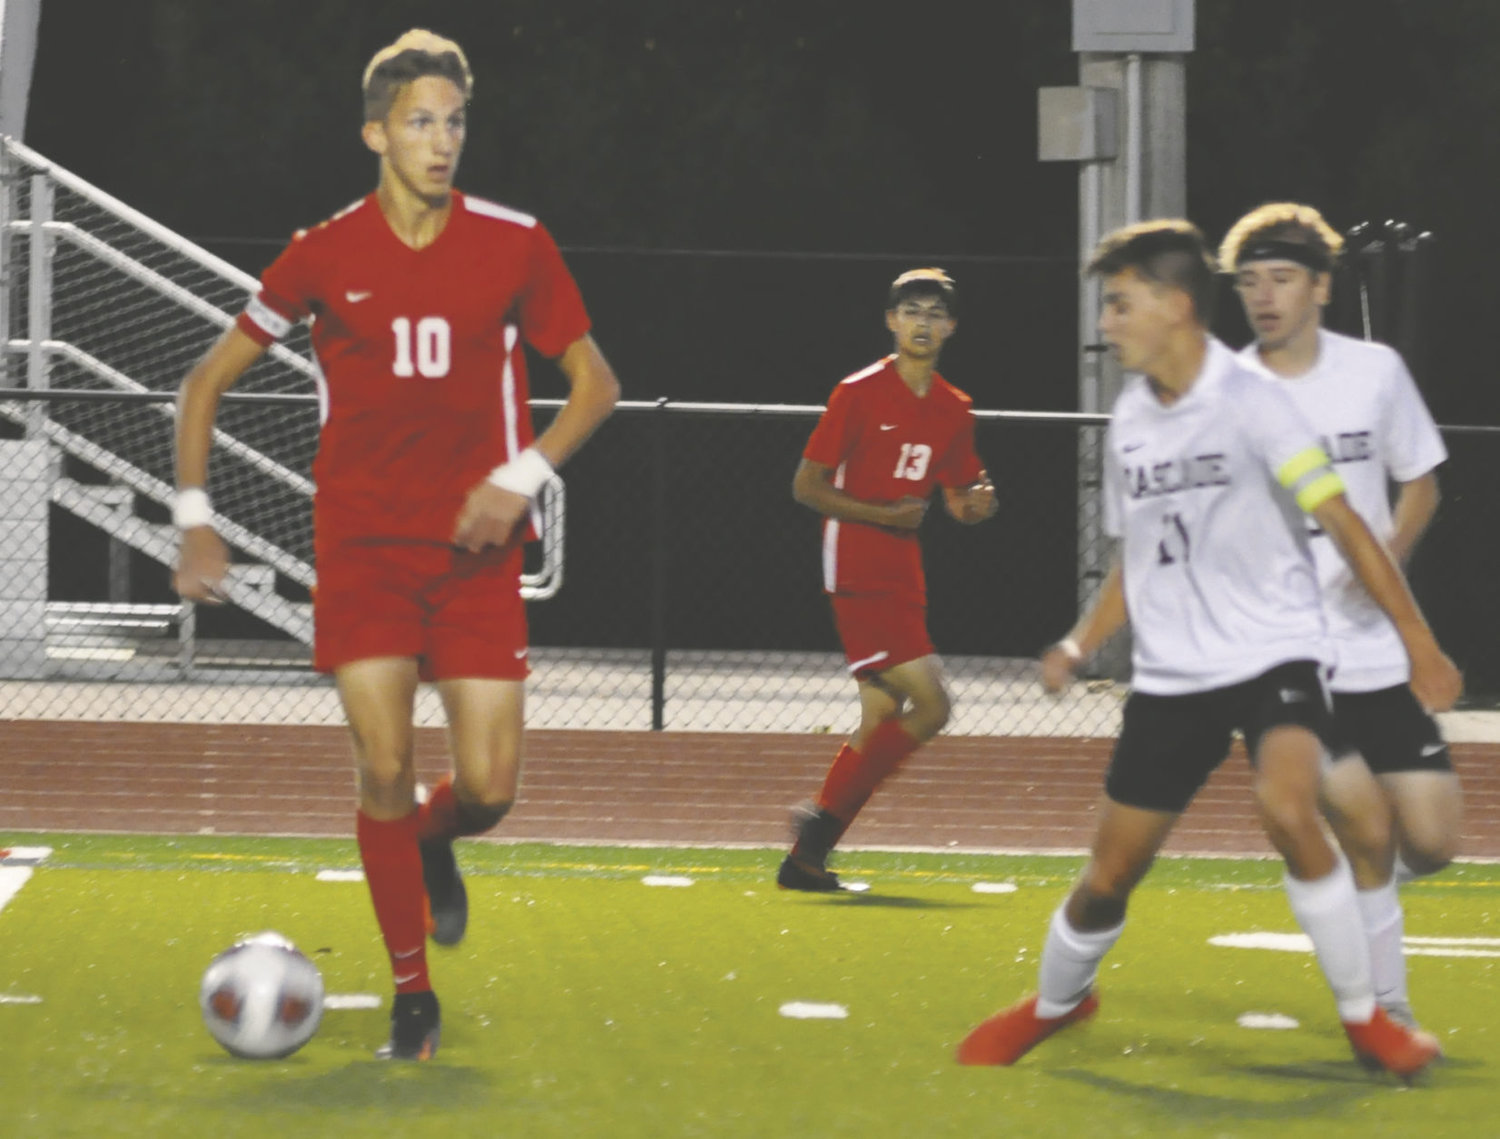 Southmont's Beckett Jett and his teammates had plenty of scoring opportunities, but were unable to find the back of the net in a 1-0 loss to Cascade on Monday.